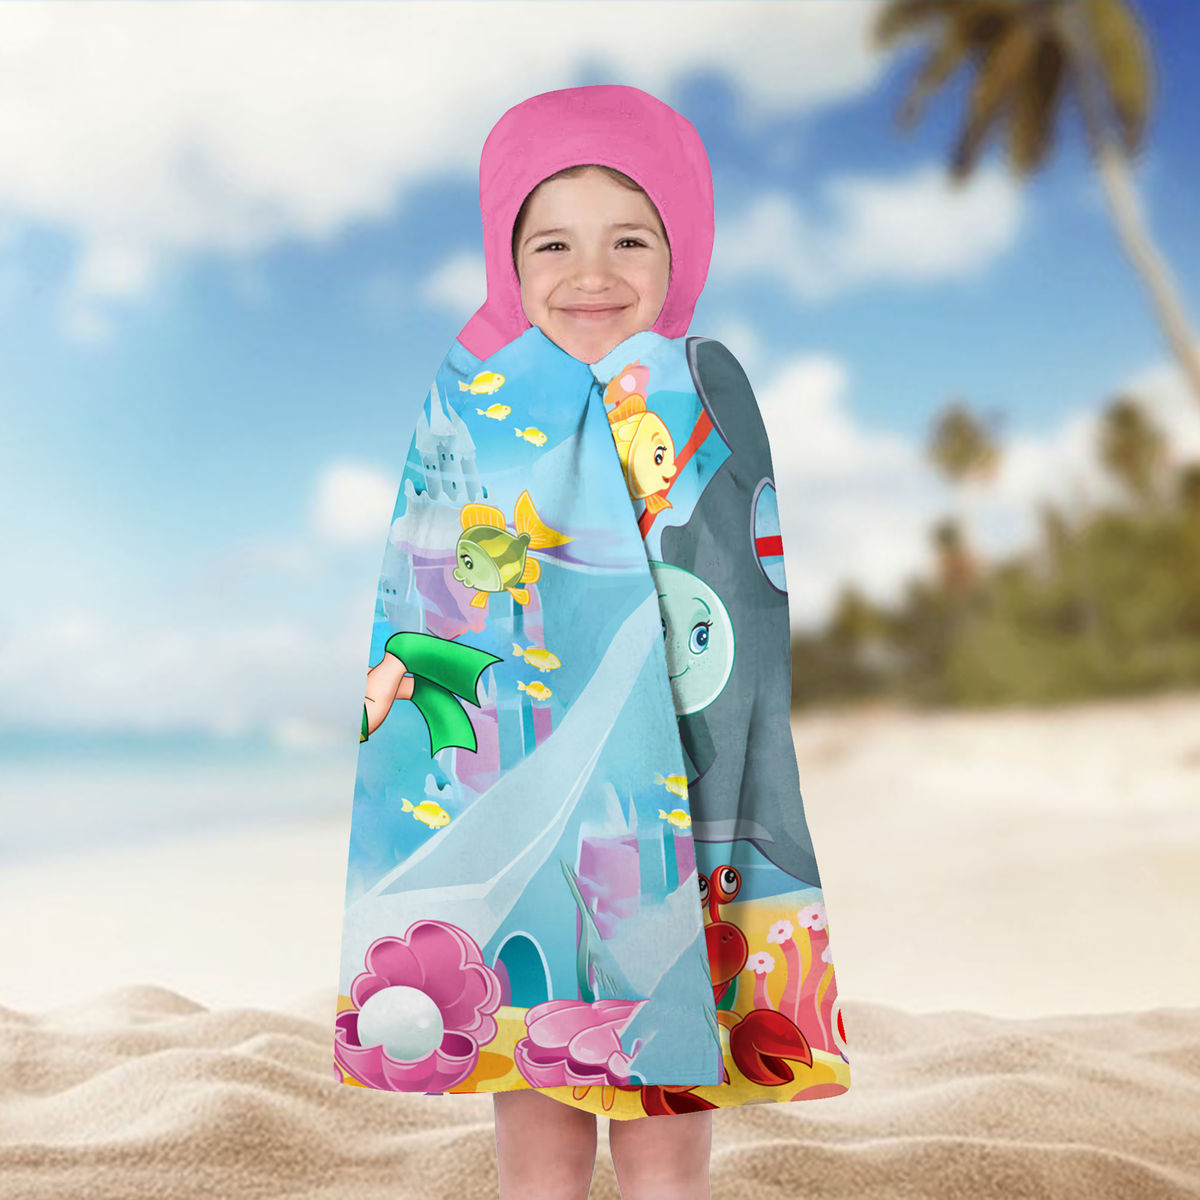 Hooded Towel - Beach Bath Towel with Hood For Kids - Custom Diver For Boy - Birthday Gifts for Toddler, Gifts For Kids_3